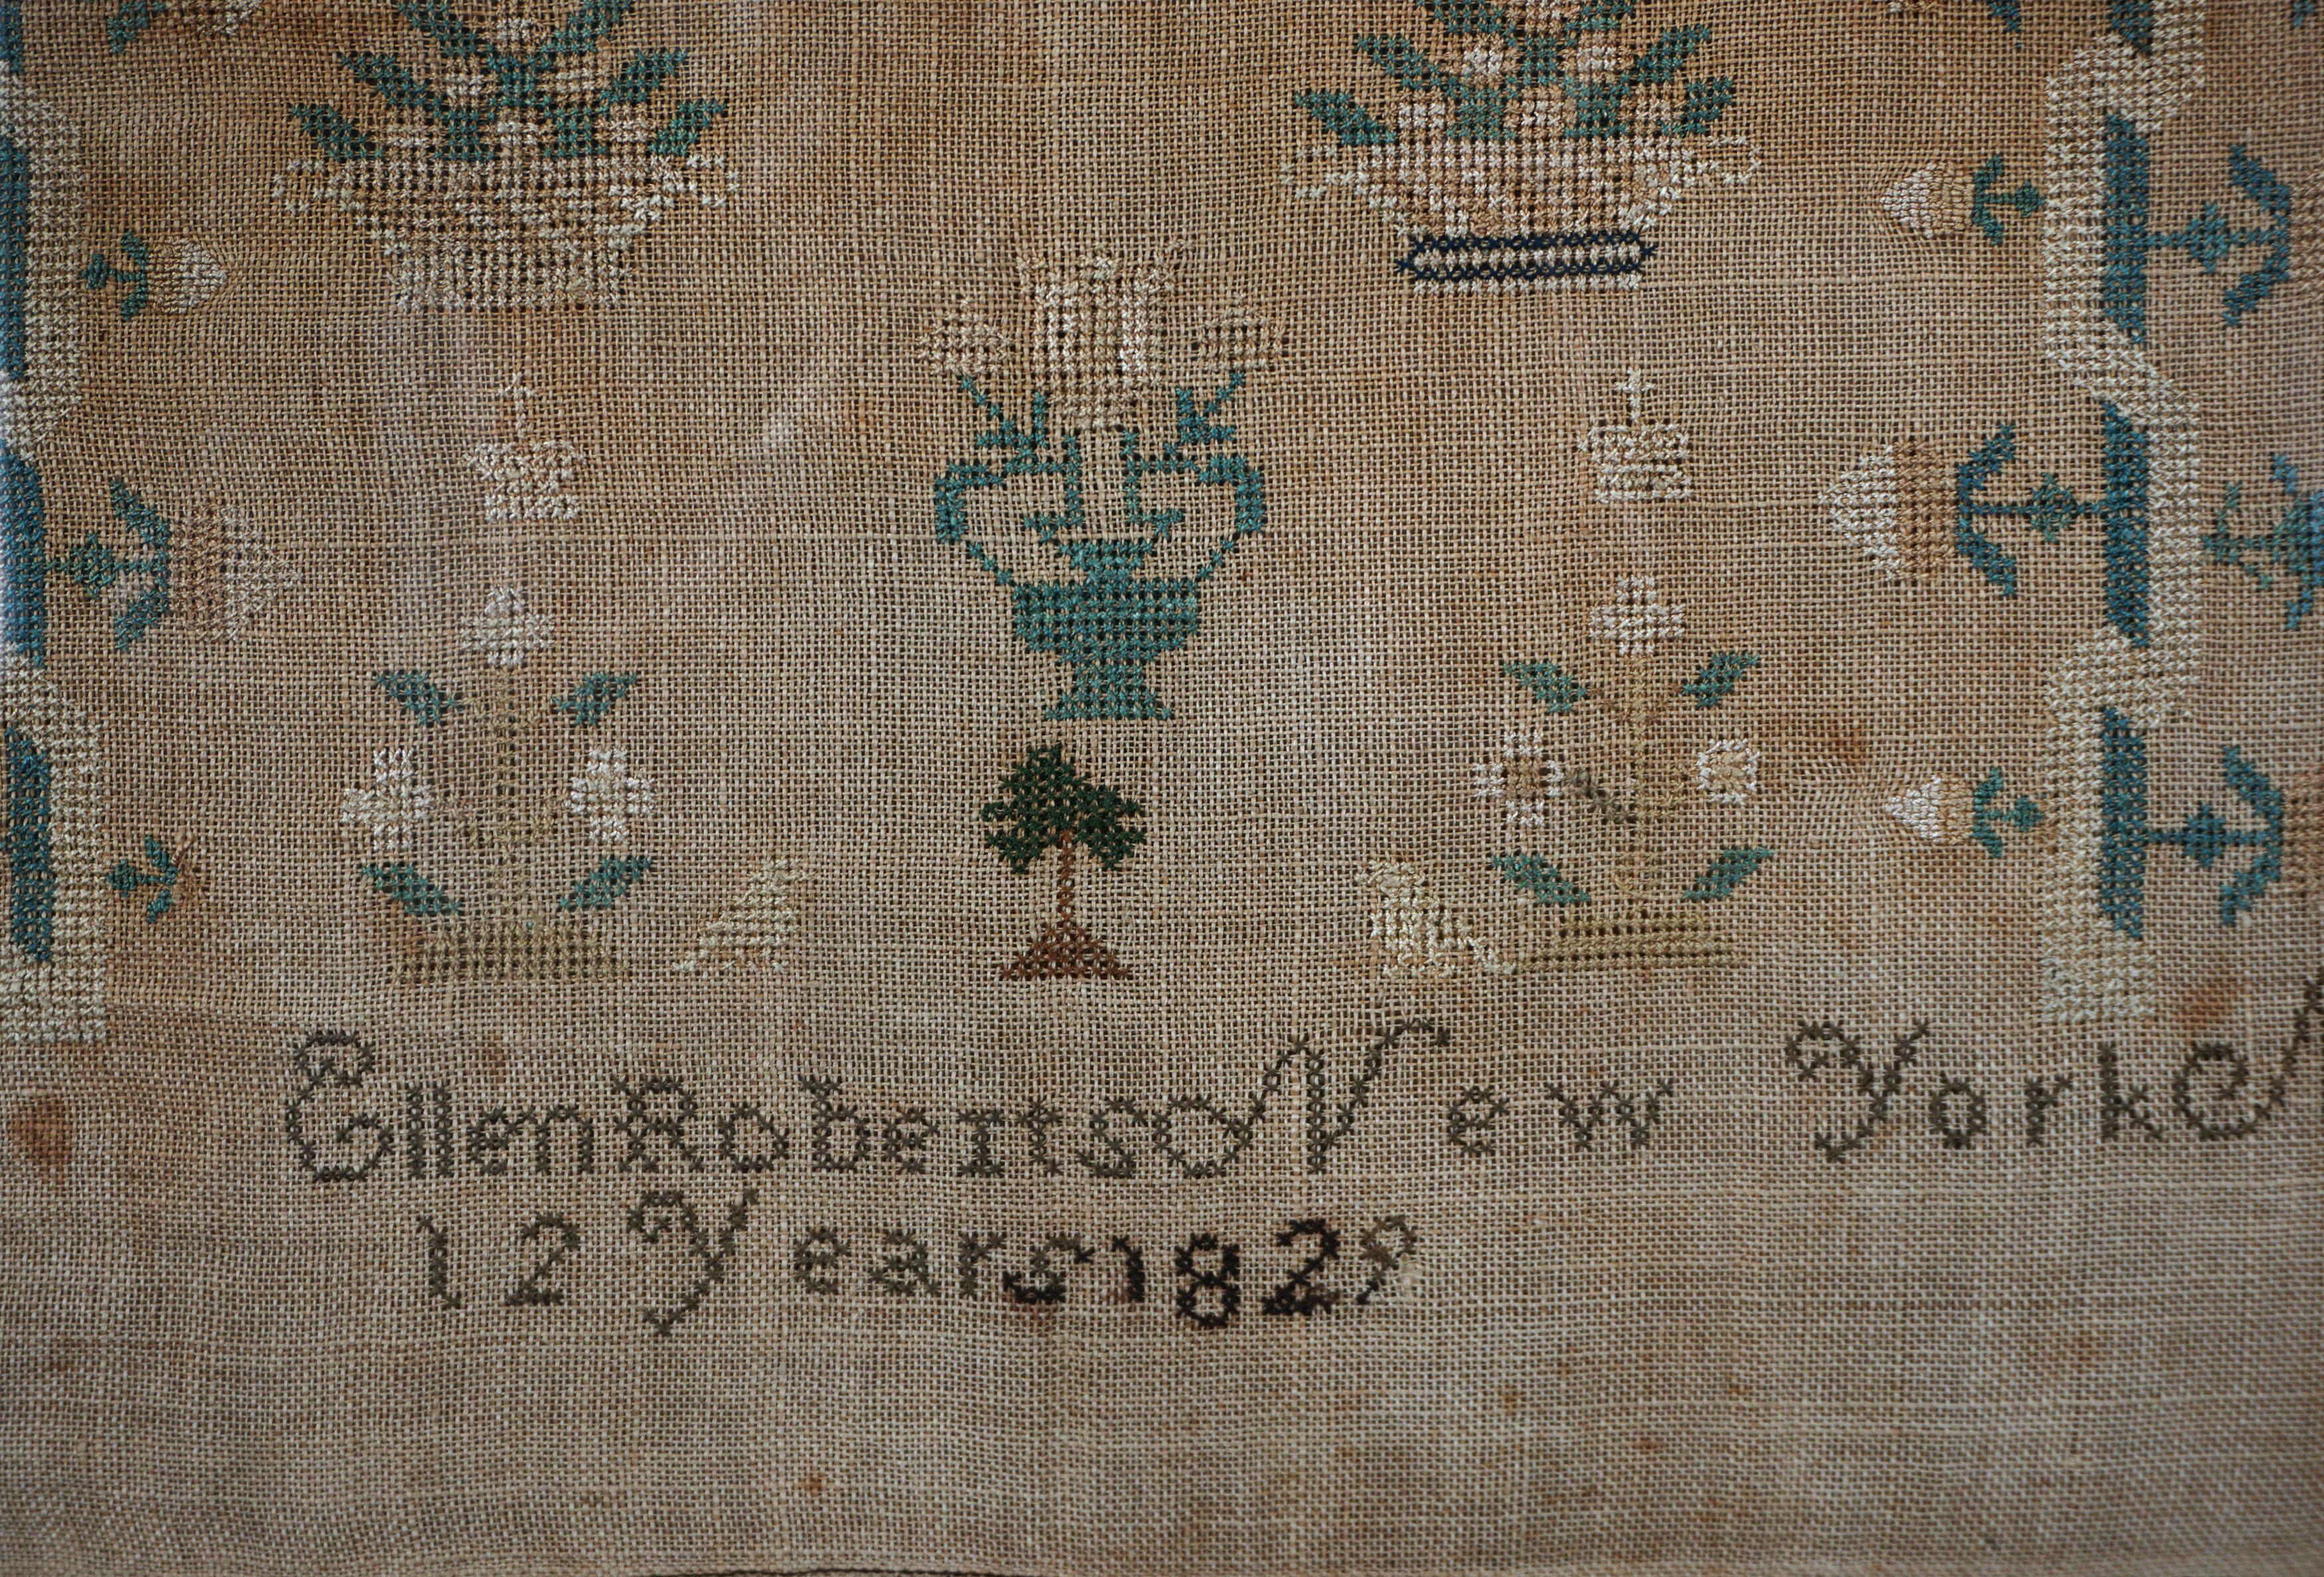 Folk Art 1829 Needlepoint Pictorial Sampler of Flowers and Quote by 12-year old Girl. For Sale